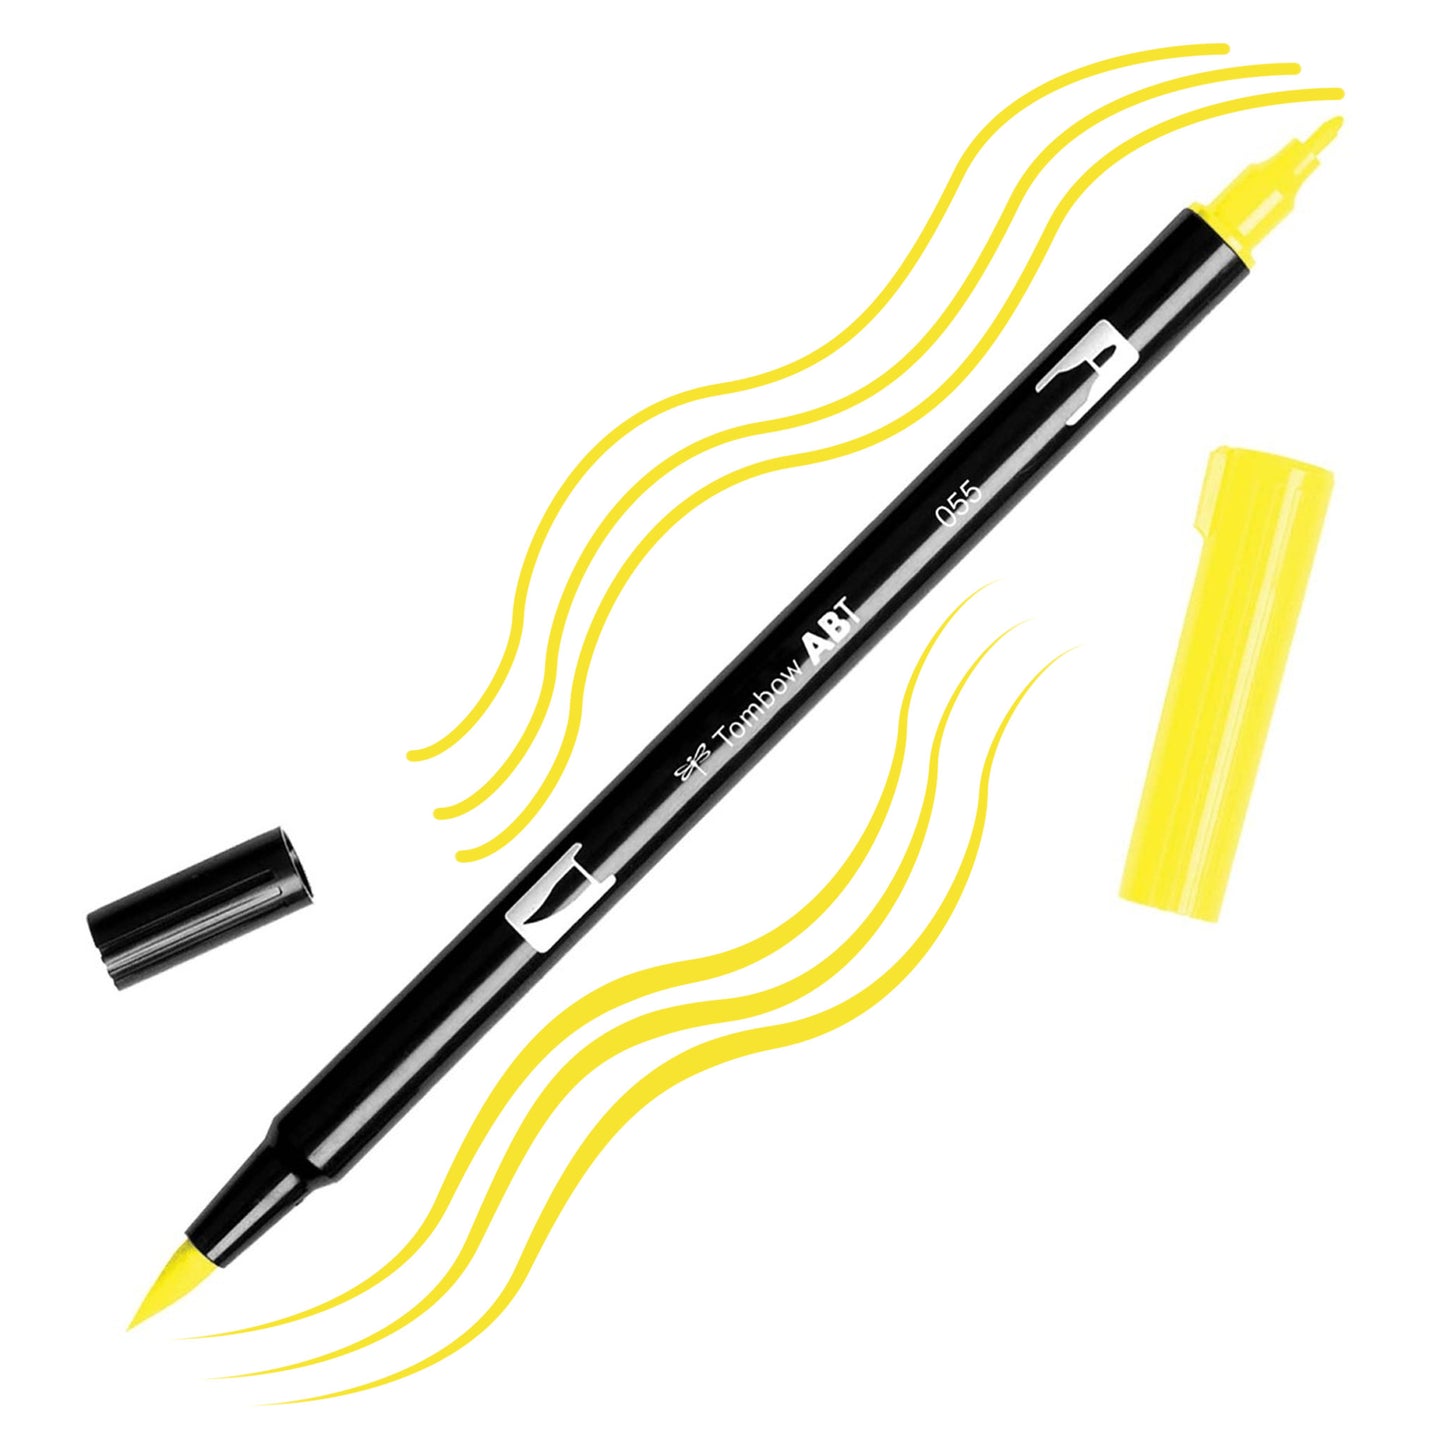 Process Yellow Tombow double-headed brush-pen with a flexible nylon fiber brush tip and a fine tip against a white background with Process Yellow strokes